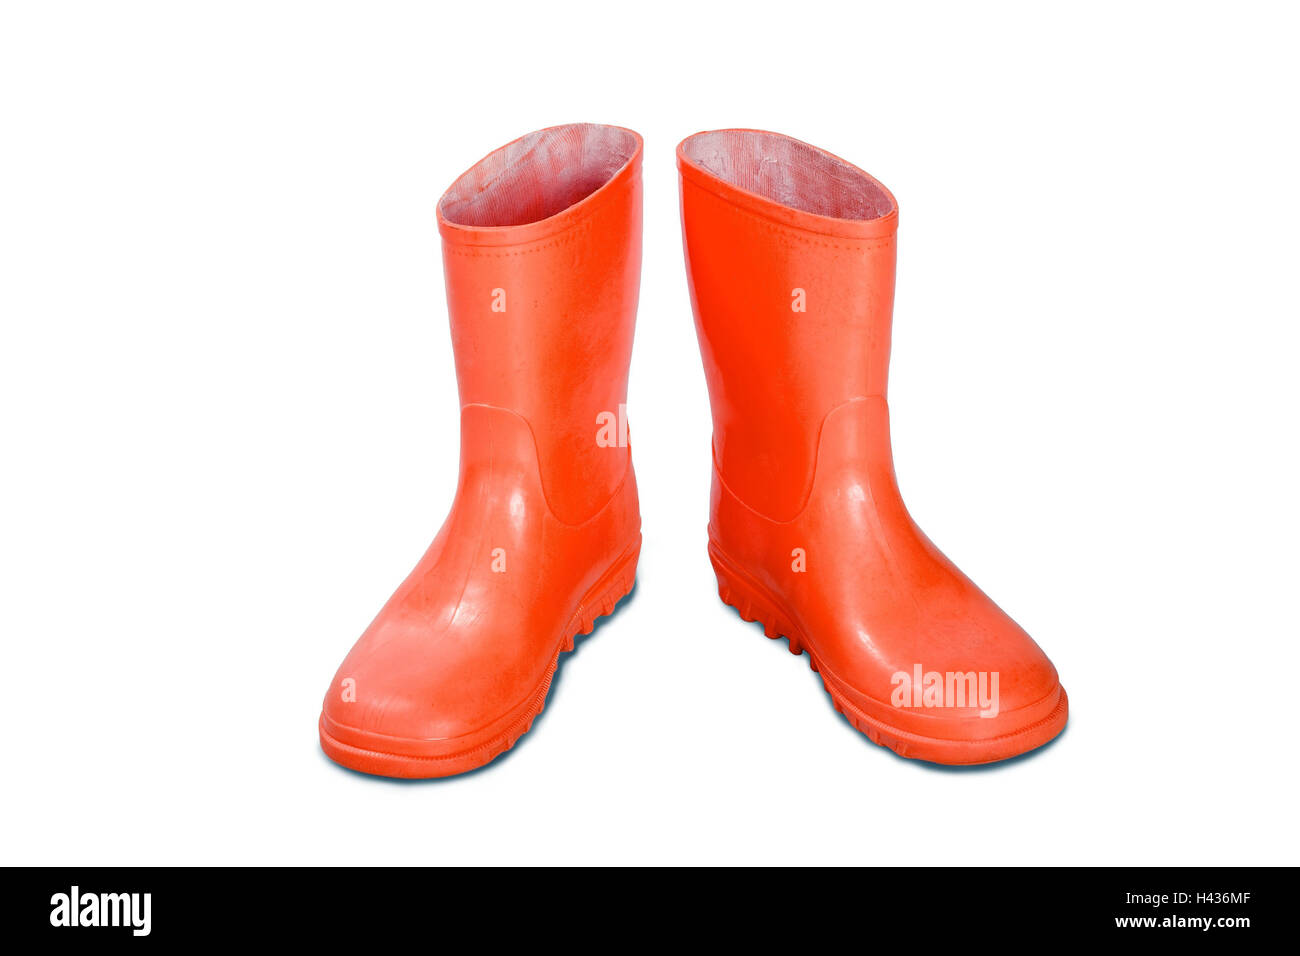 Wellington, red, rain boat, boot, in pairs, waterproof, rainwear, equipment, Outdoor, weather, weatherproofly, moisture protection, footwear, function clothes, rain protection, product photography, cut out, Stock Photo